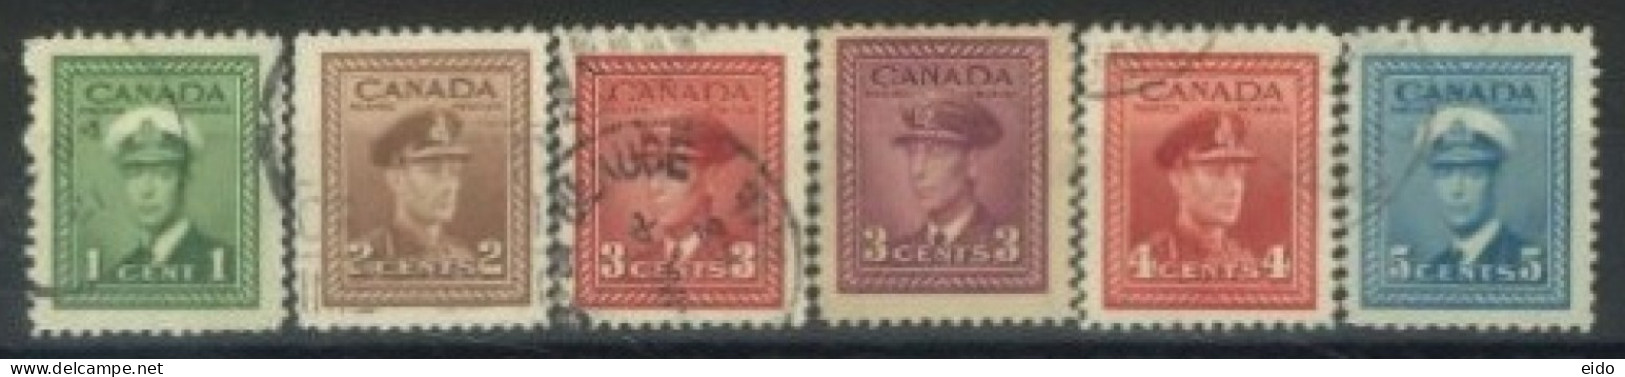 CANADA - 1942, KING GEORGE VI IN NAVAL UNIFORM STAMPS SET OF 6, USED. - Used Stamps